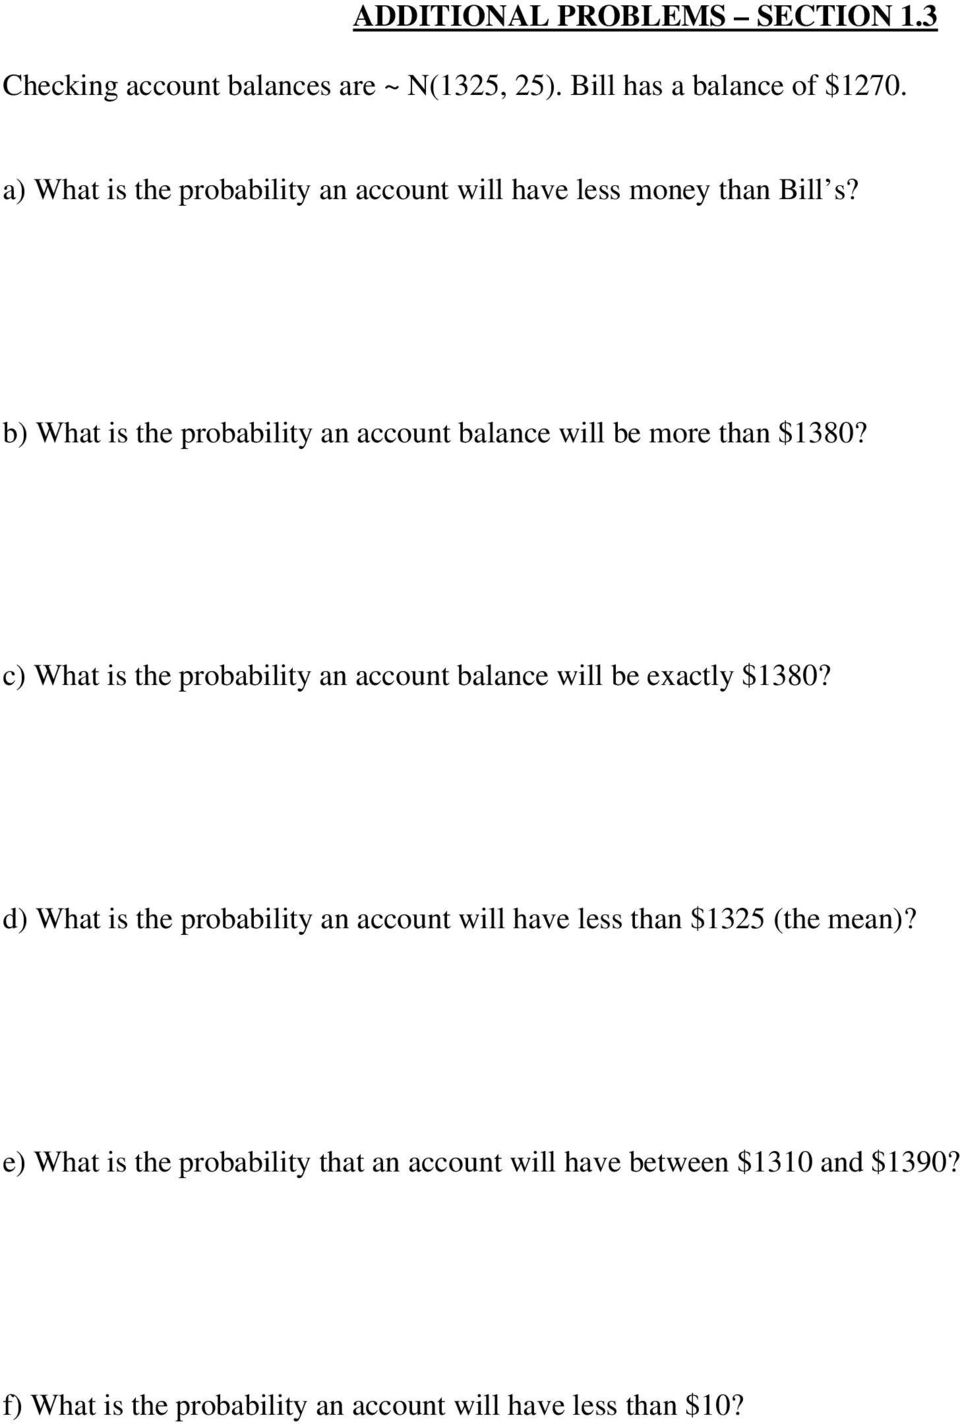 b) What is the probability an account balance will be more than $1380?